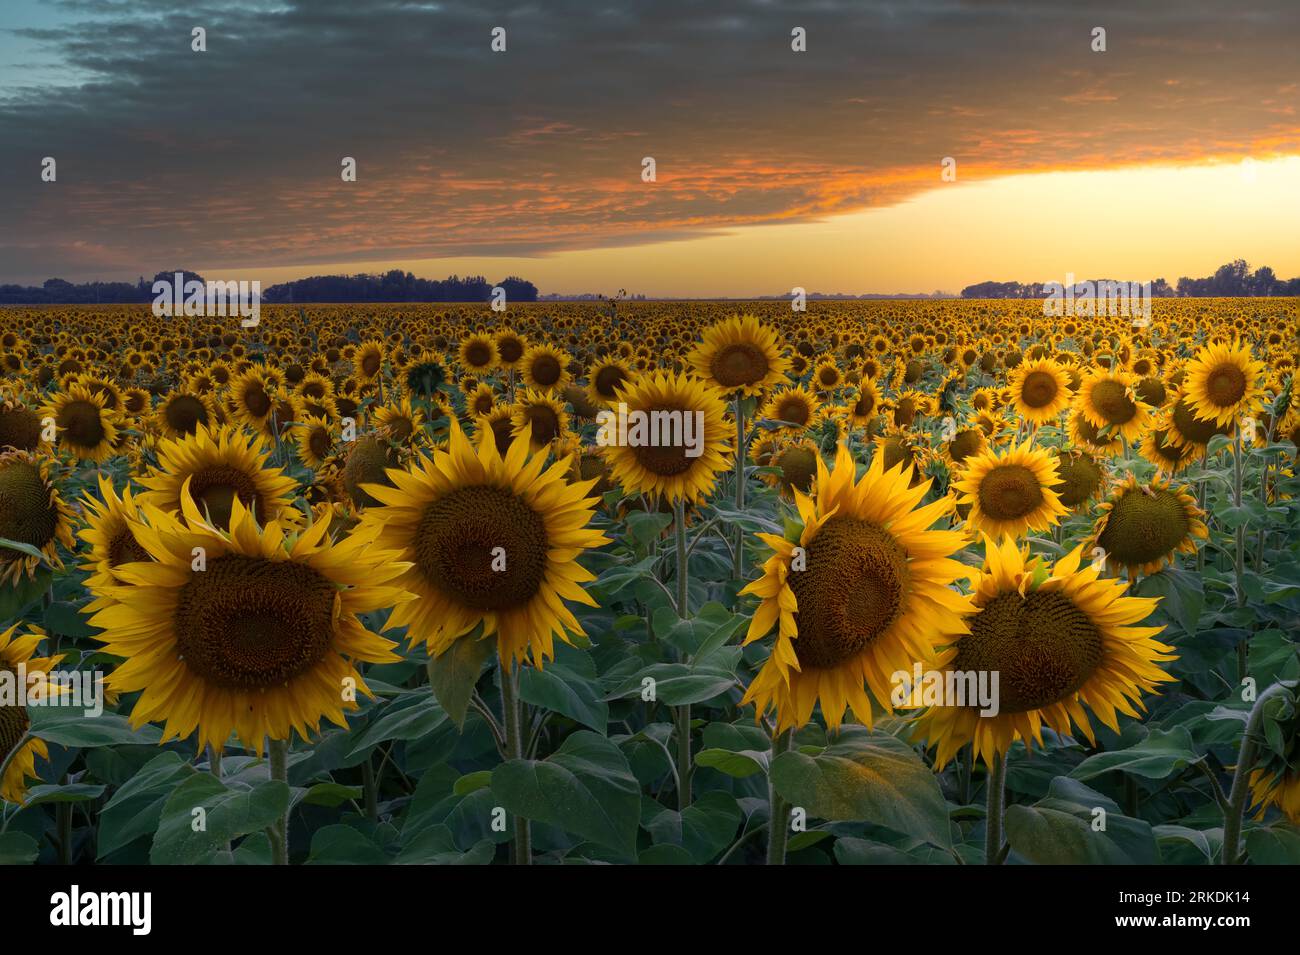 A field of sunflowers at sunset near Plum Coulee, Manitoba, Canada. Stock Photo